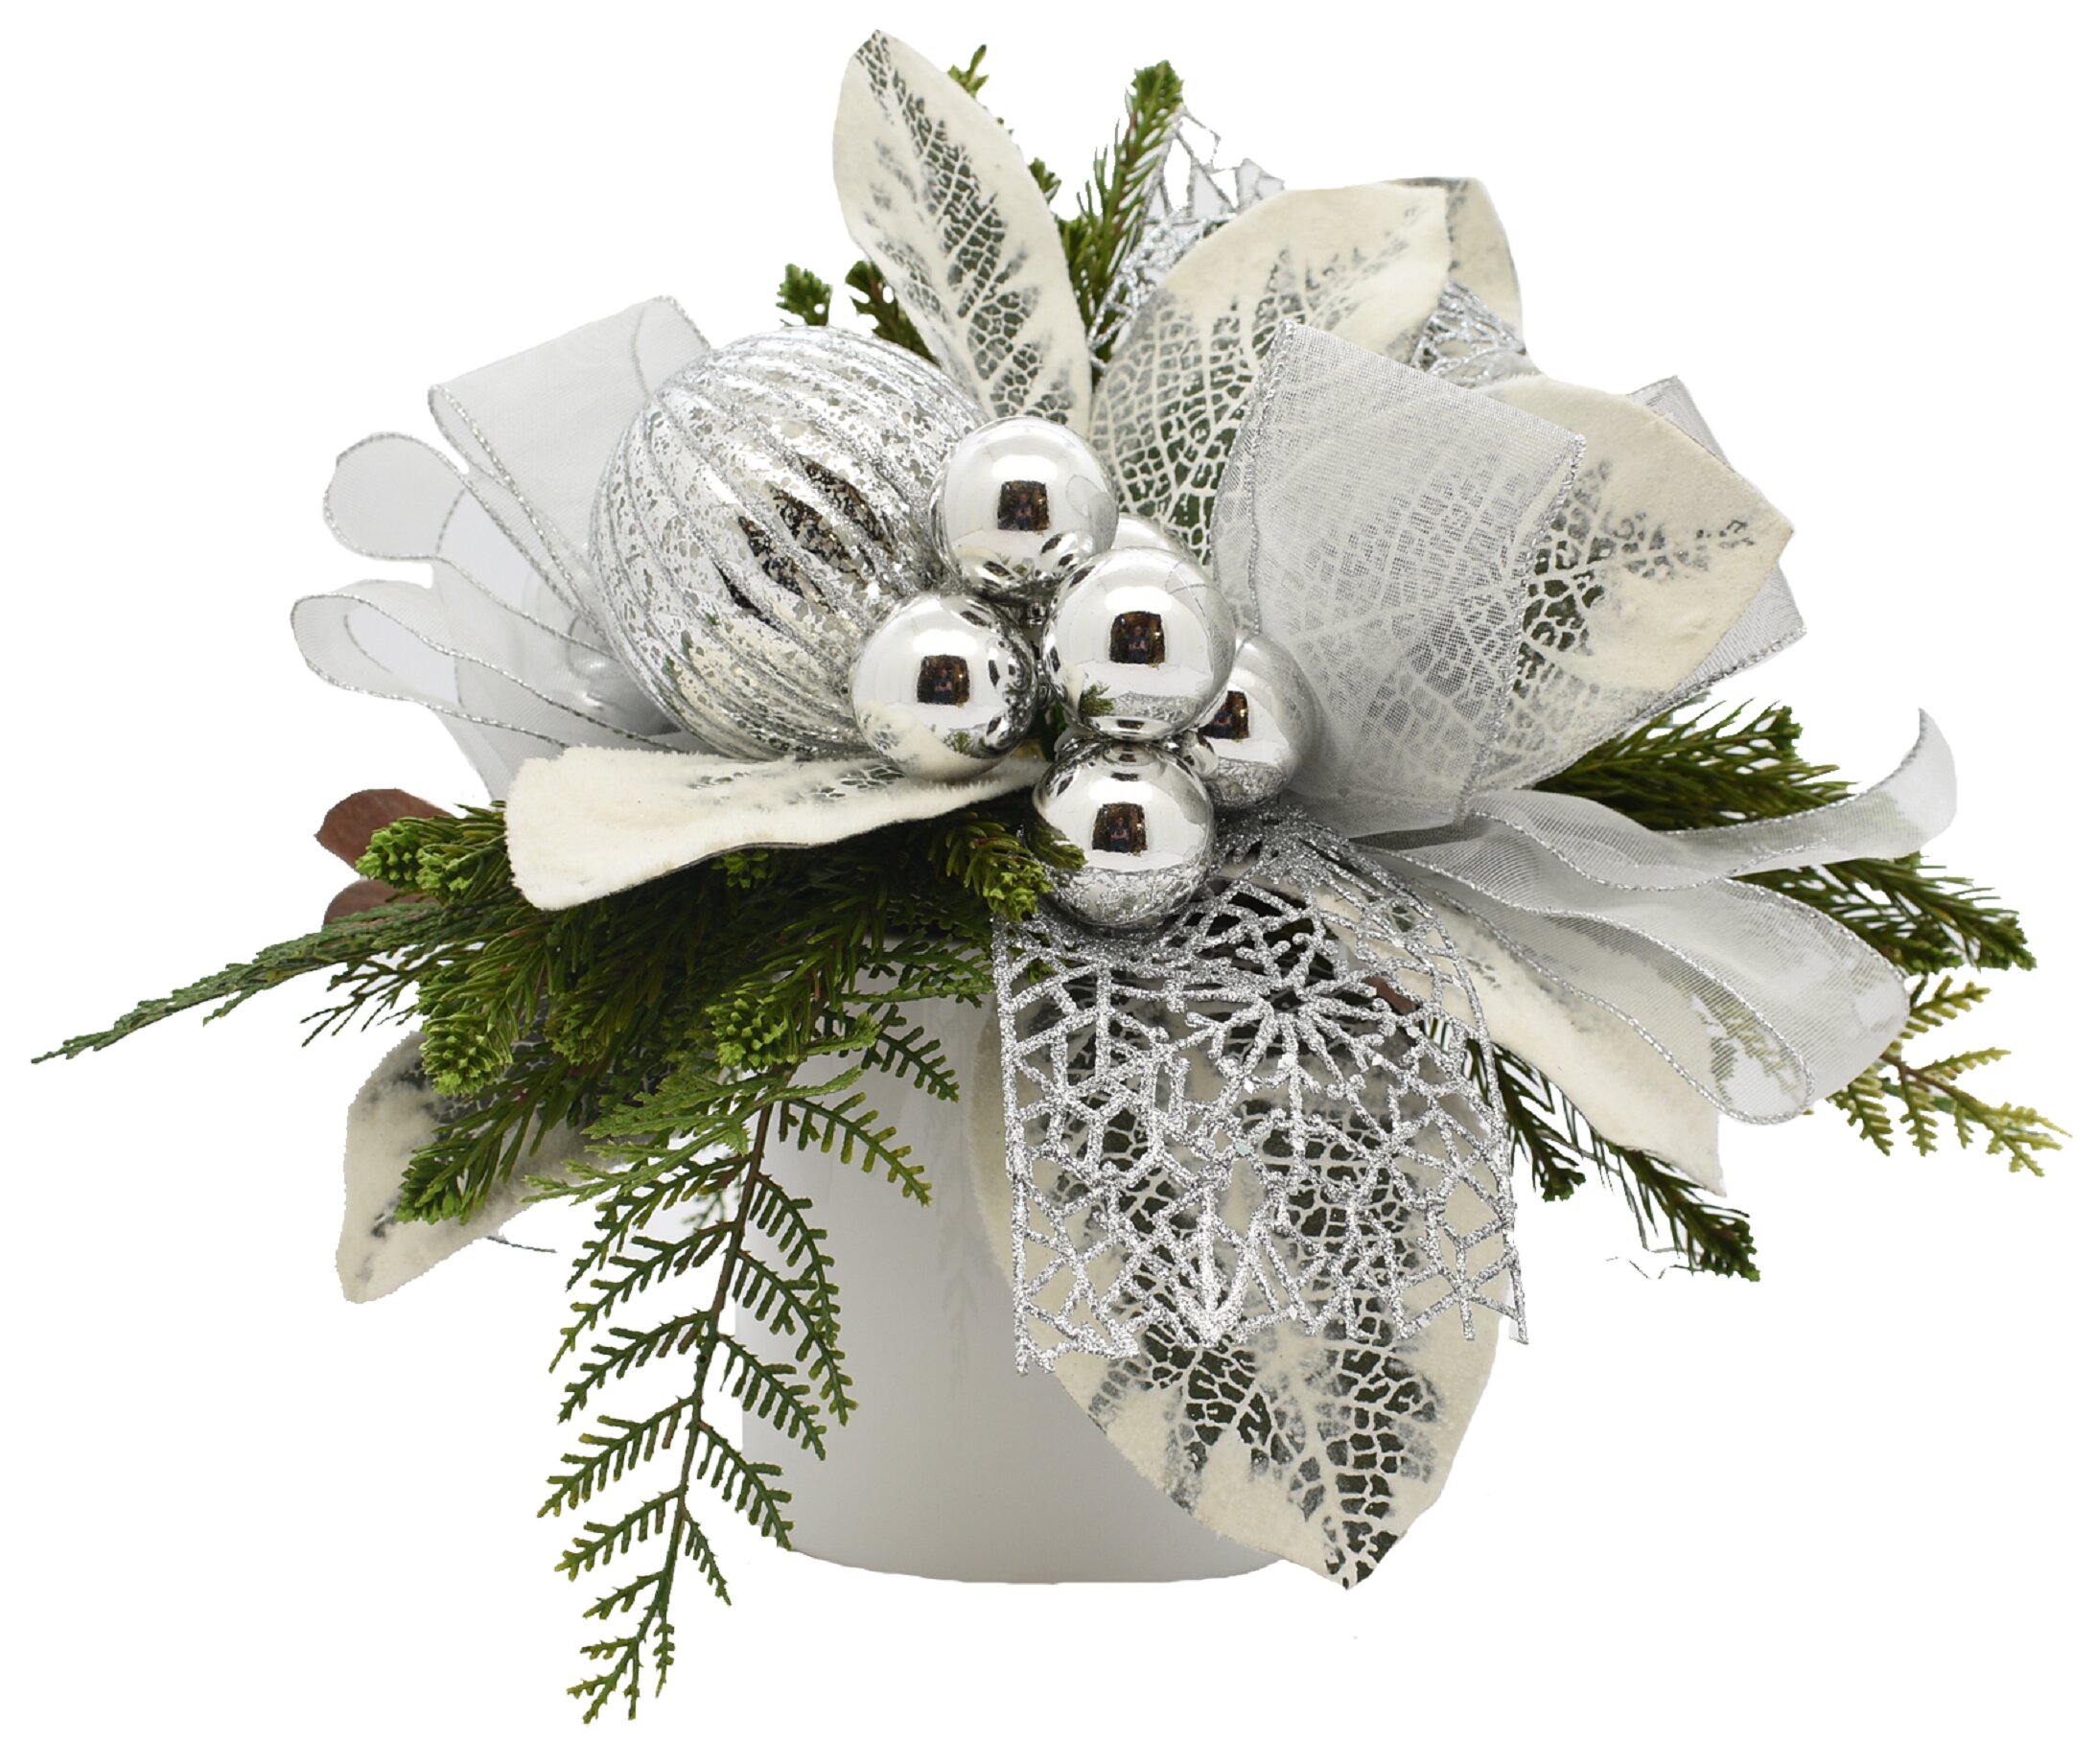 small holiday floral arrangements